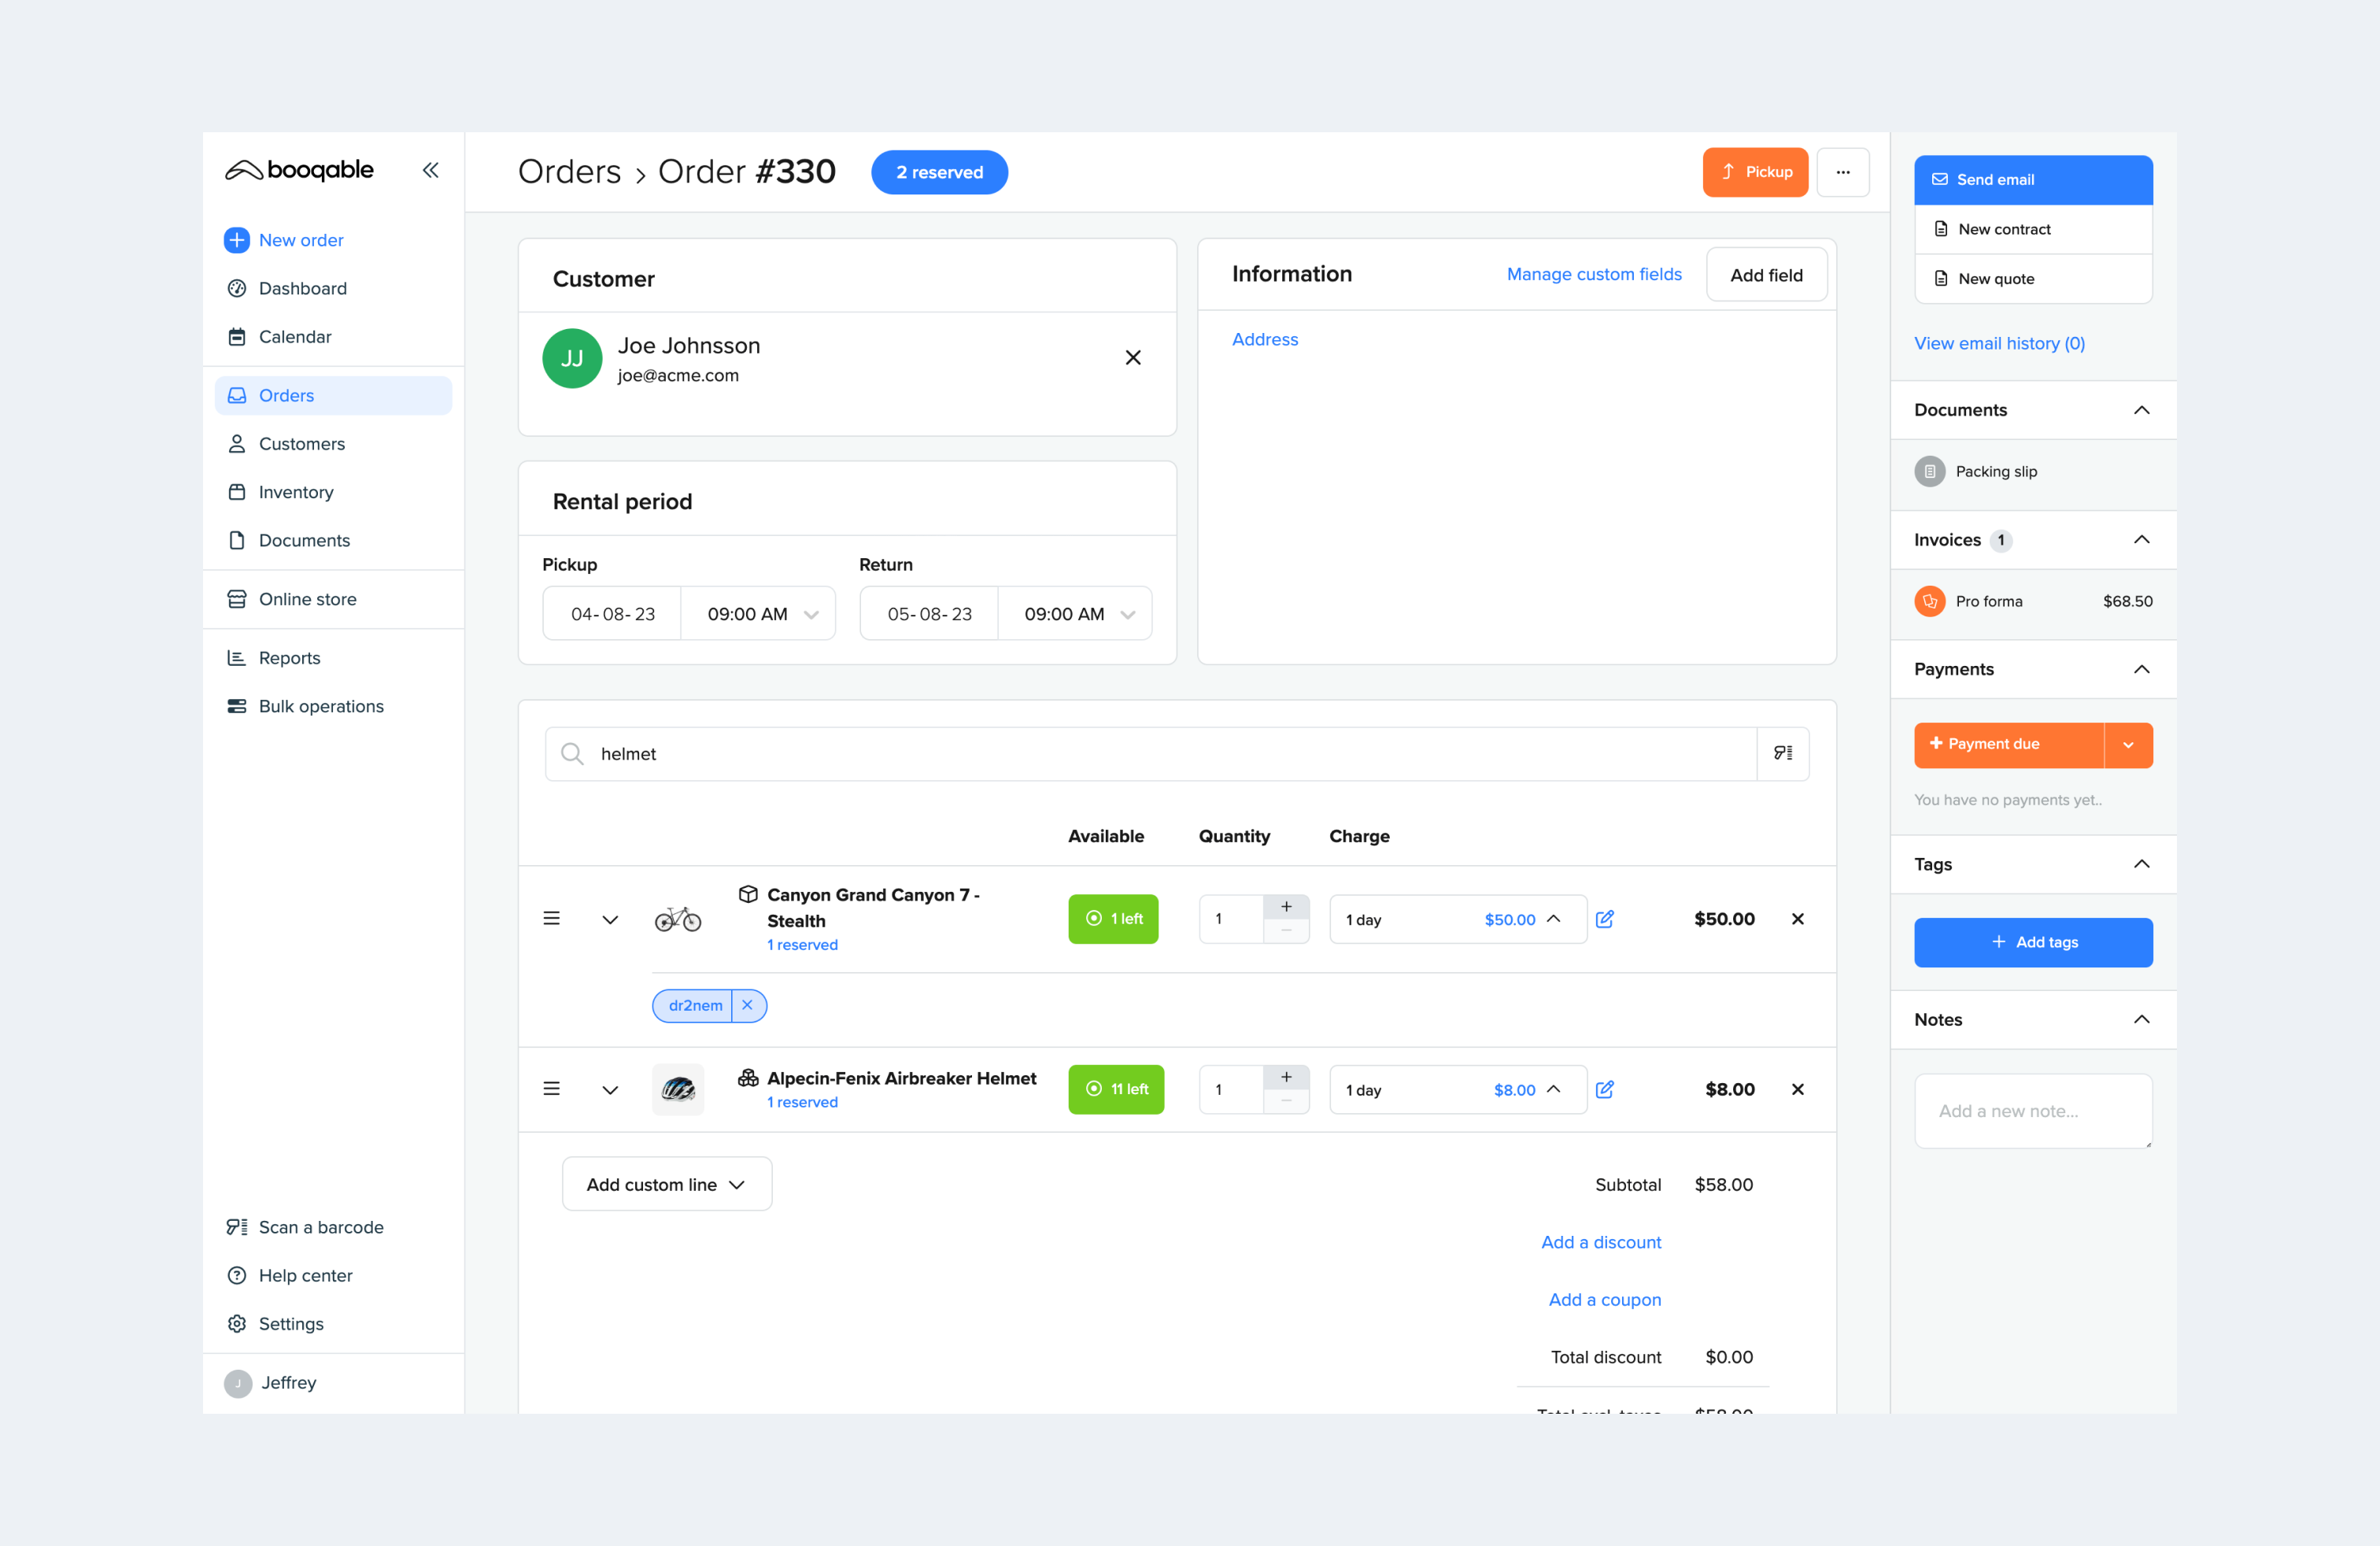 Create and manage orders with clear availability insights. Booqable prevents double bookings by auto-reserving products, which always keeps your inventory up-to-date.